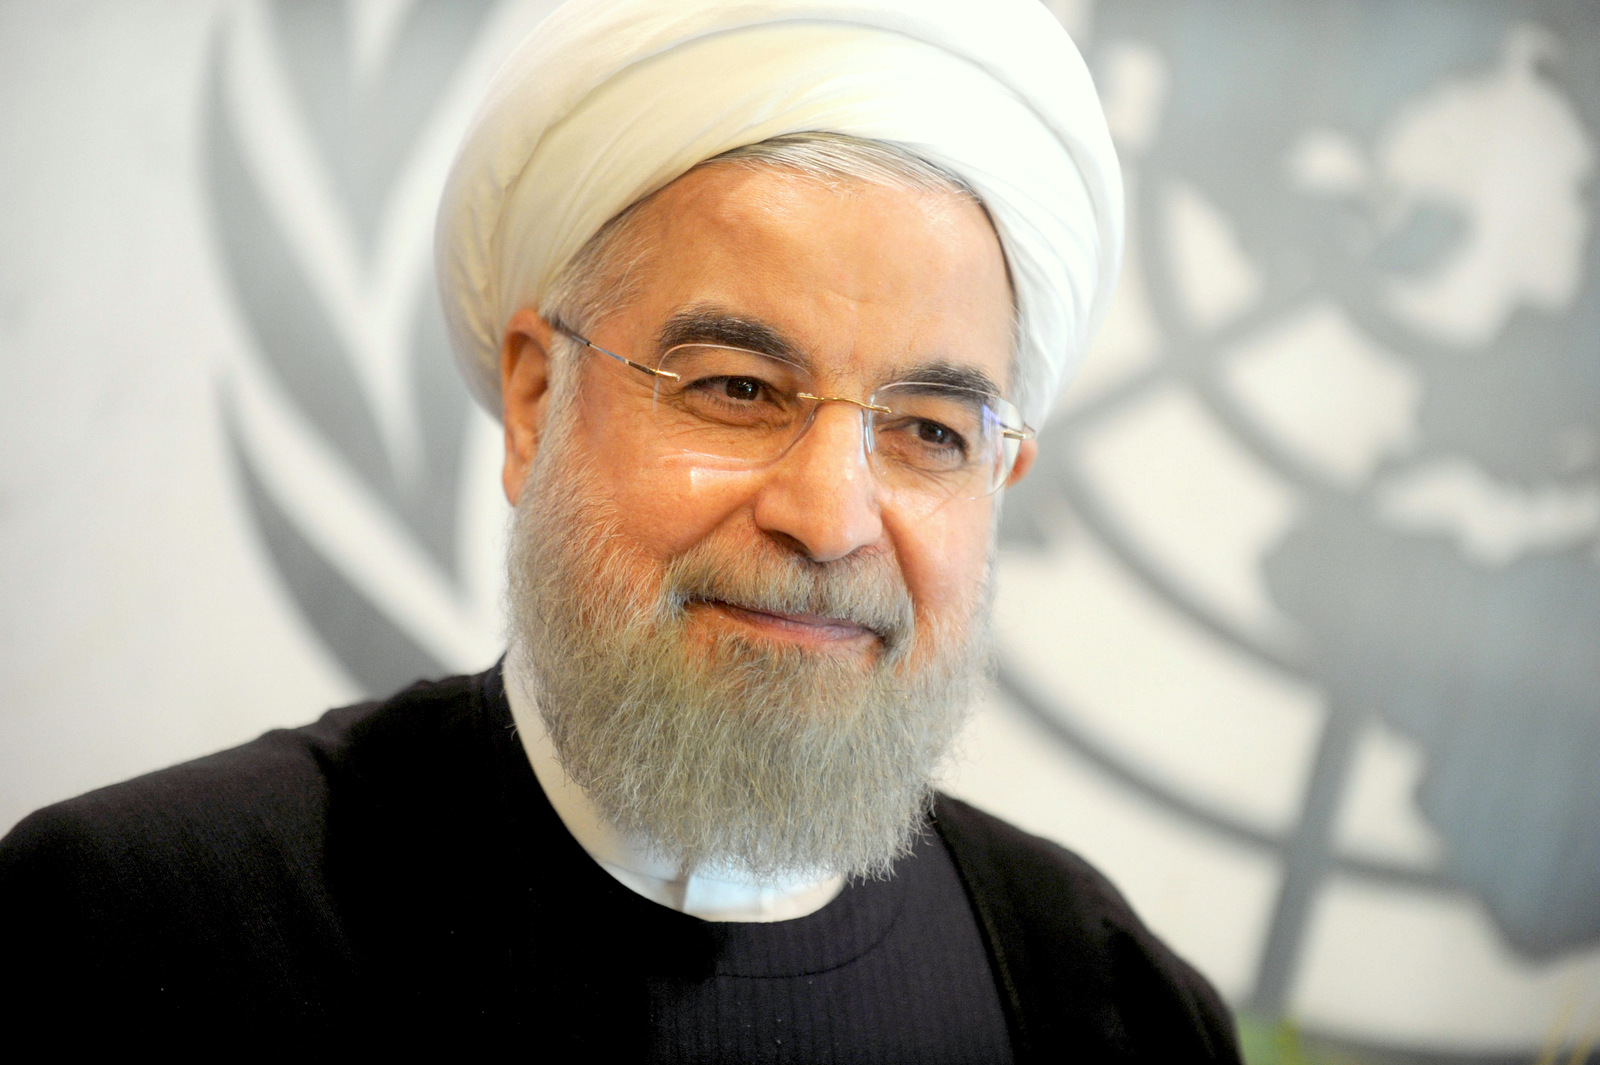 President Rouhani said a Saudi-led coalition that has been bombing Yemen since March has prompted a humanitarian crisis and is main cause behind the spread of extremism in the region. (Photo by: Dennis Van Tine/STAR MAX/IPx)